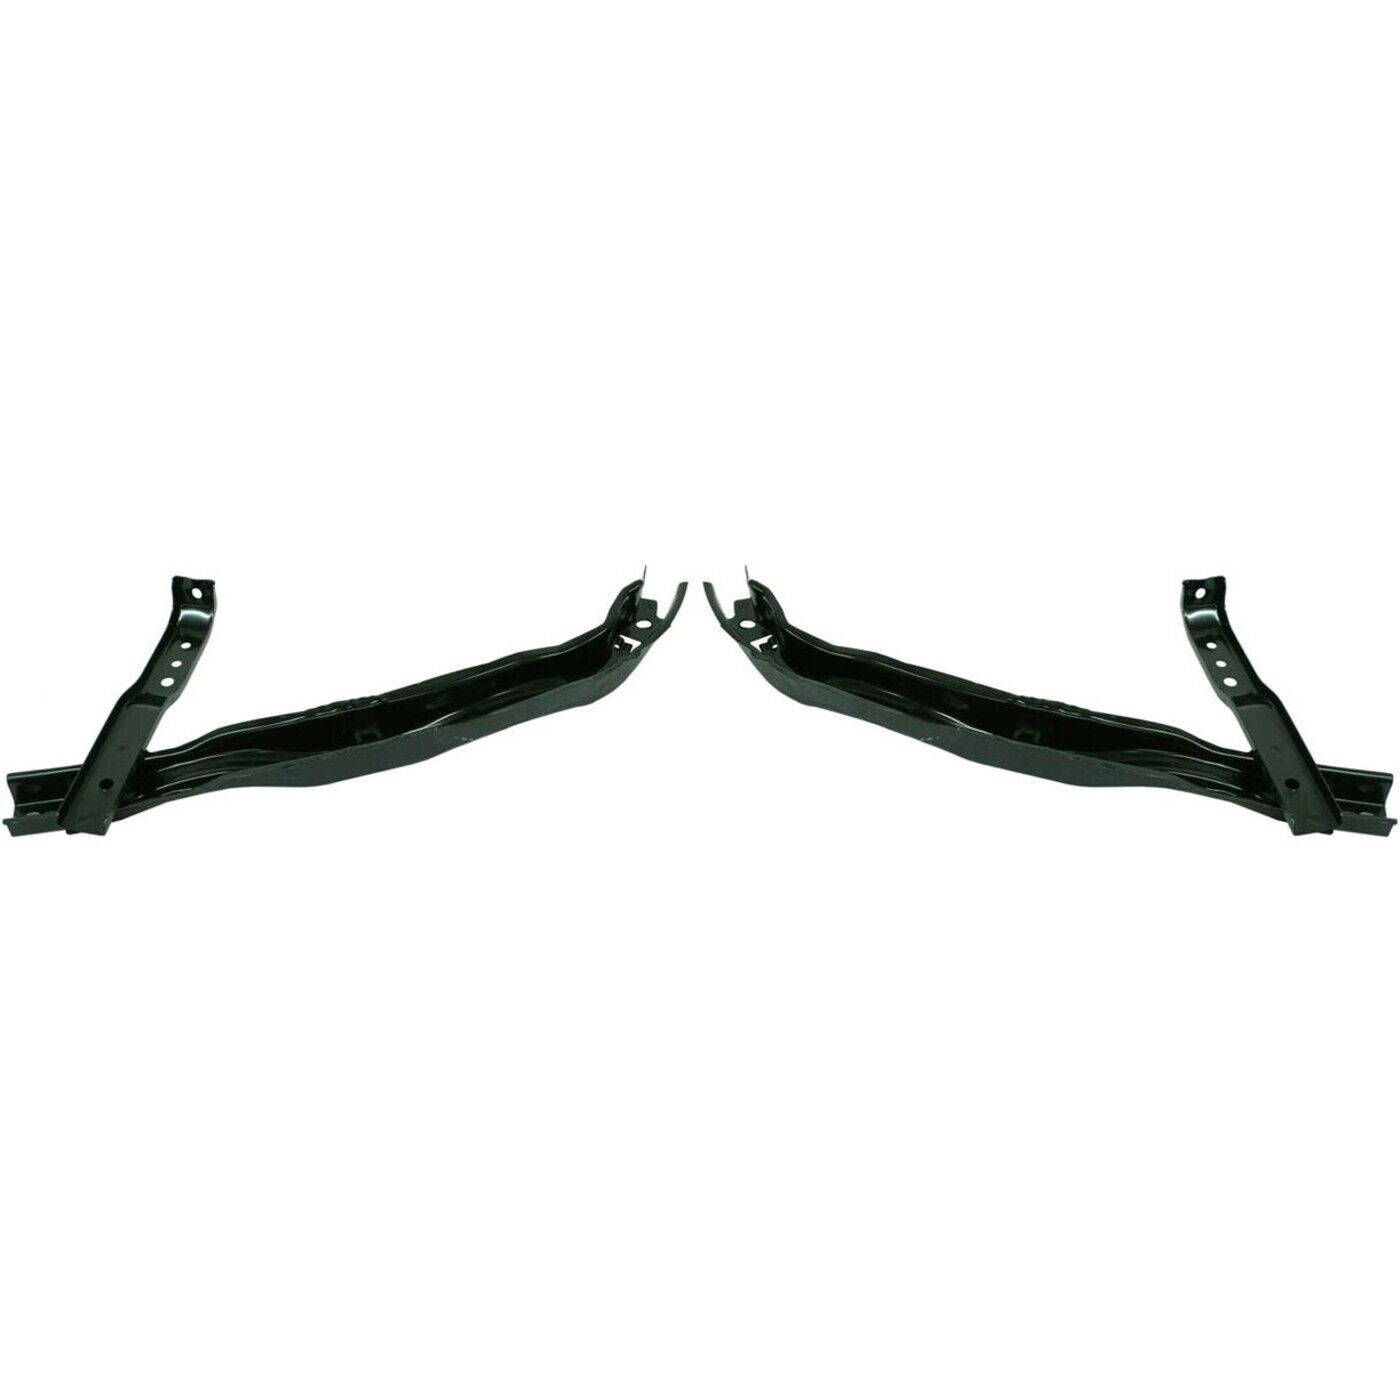 Bumper Bracket For 2002-2004 Acura RSX Set of 2 Front, Driver and Passenger Side